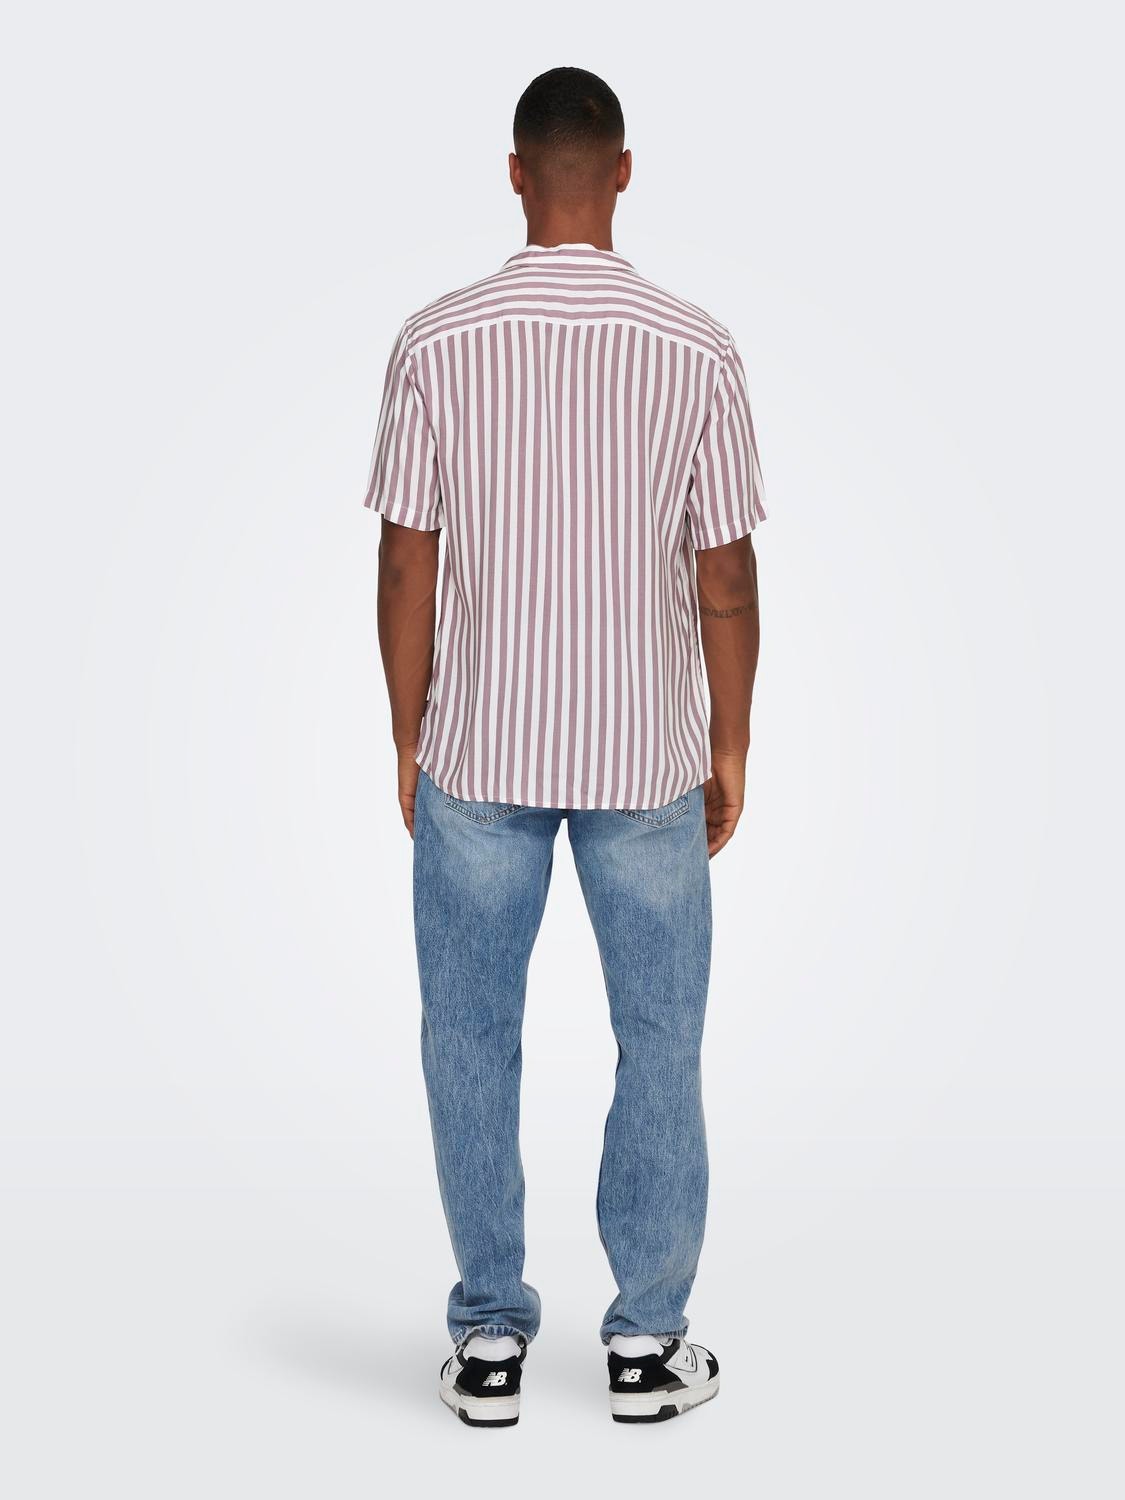 ONLY & SONS Short sleeved striped shirt -Nirvana - 22013267